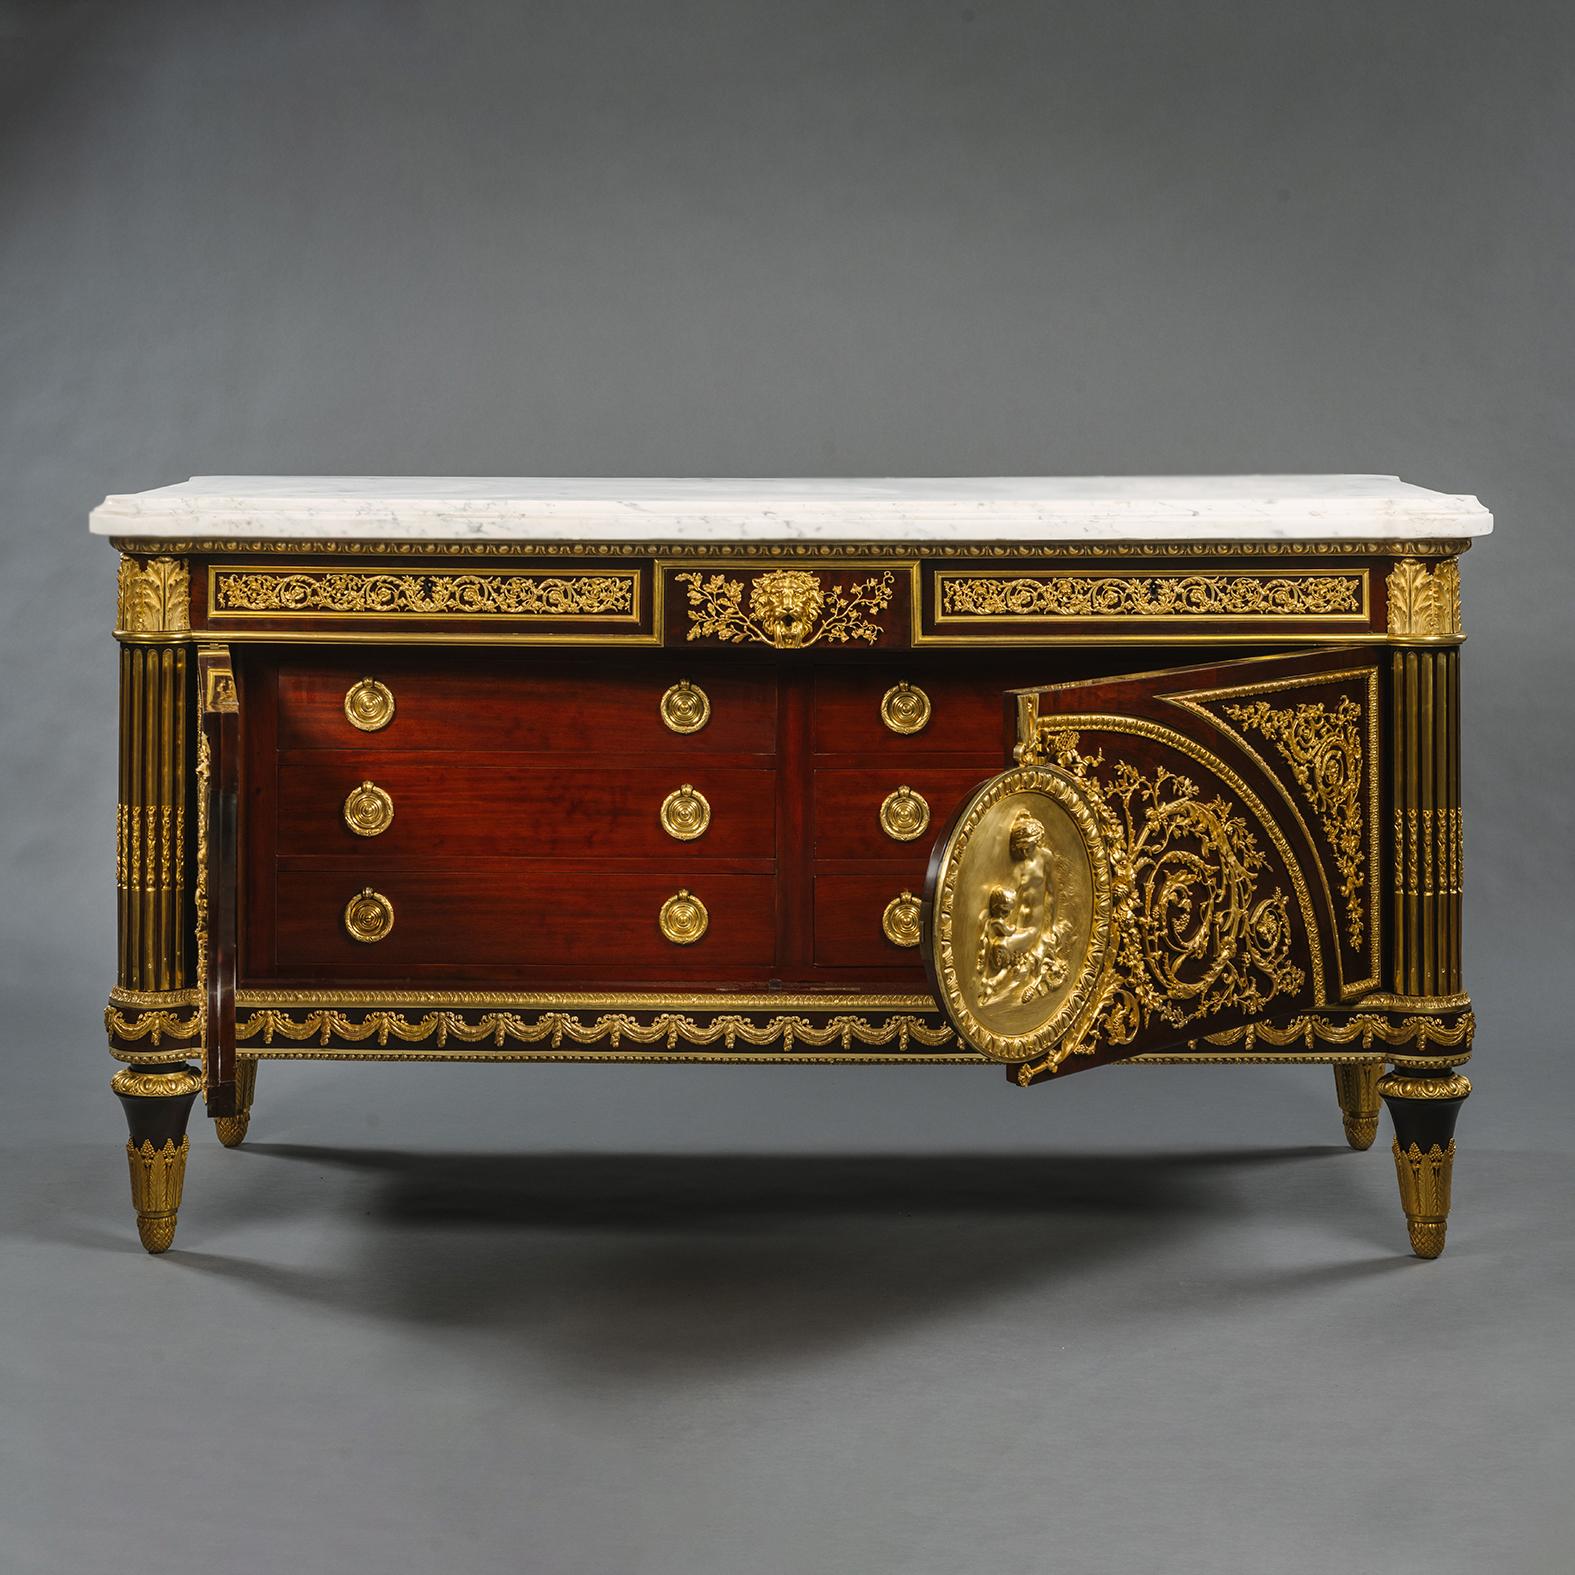 A Louis XVI Style Gilt-Bronze Mounted Mahogany Commode, After The Model By Joseph Stöckel and Guillaume Benneman. 

Decorated overall with berried scrolling foliage, the eared rectangular white marble top above egg-and-dart moulding and three frieze